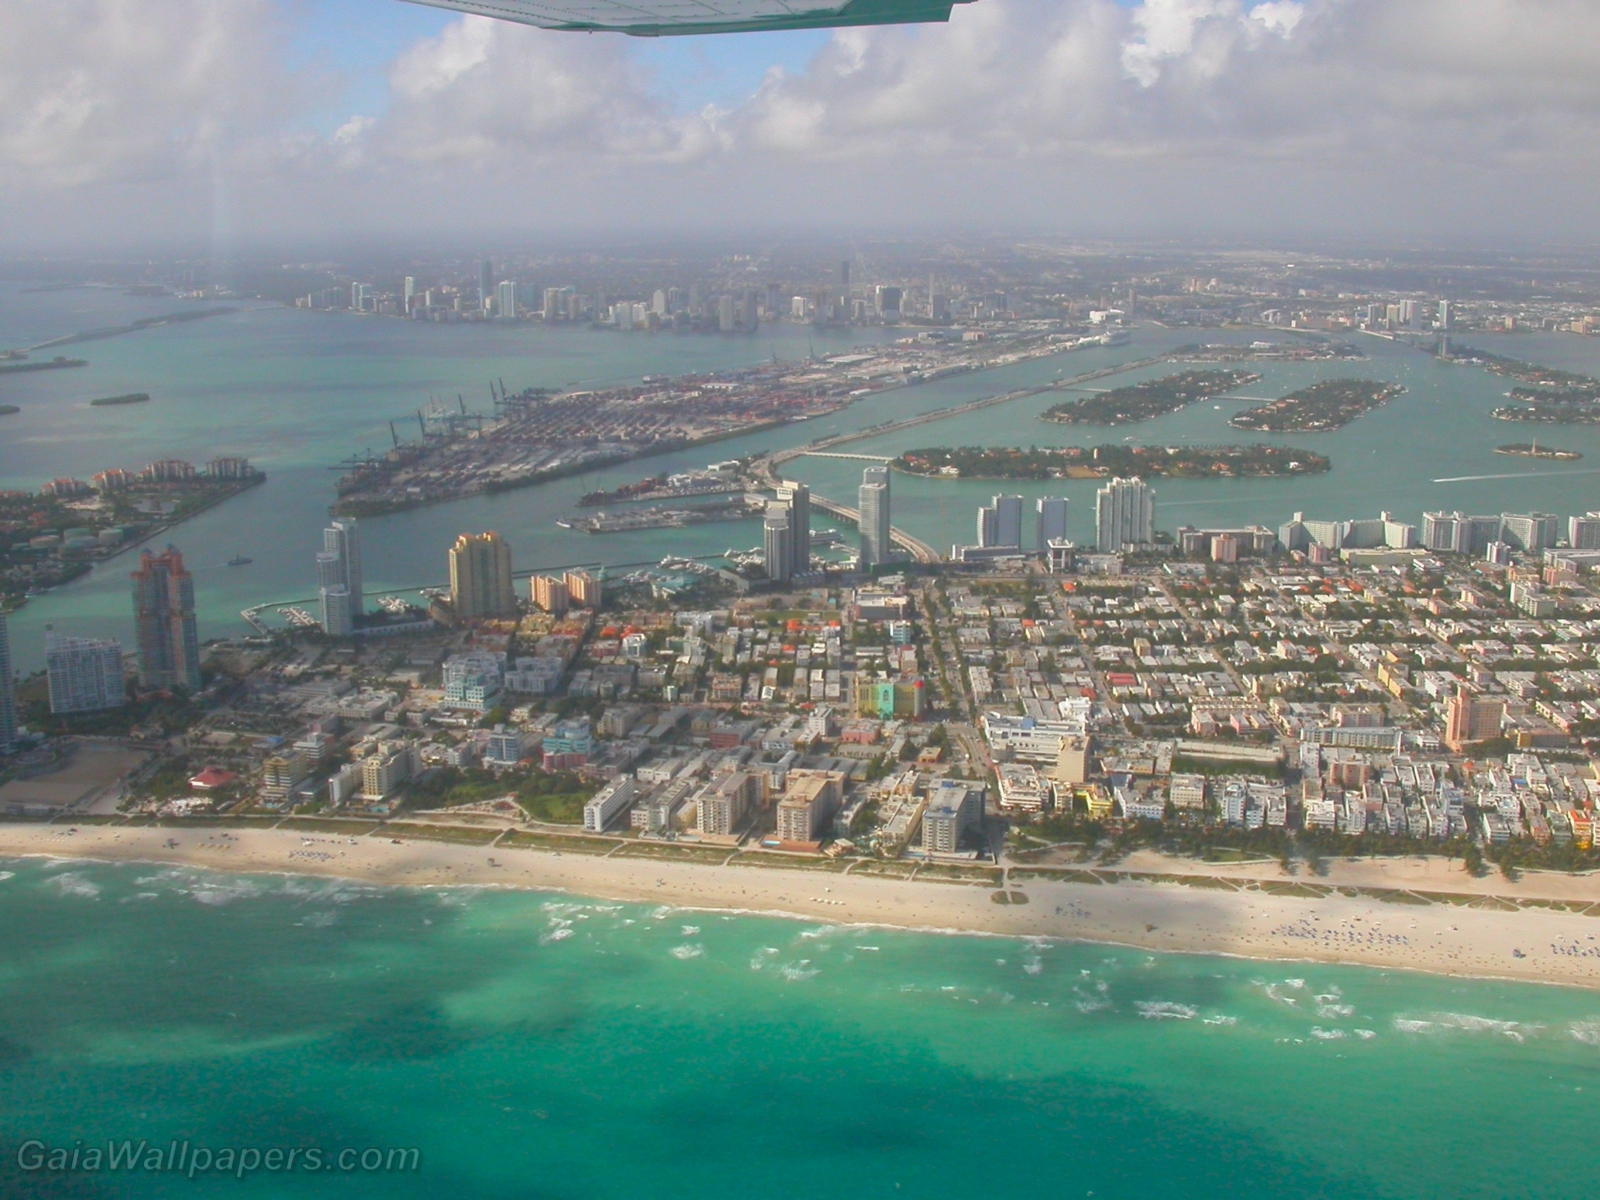 Florida shore seen from the air - Free desktop wallpapers